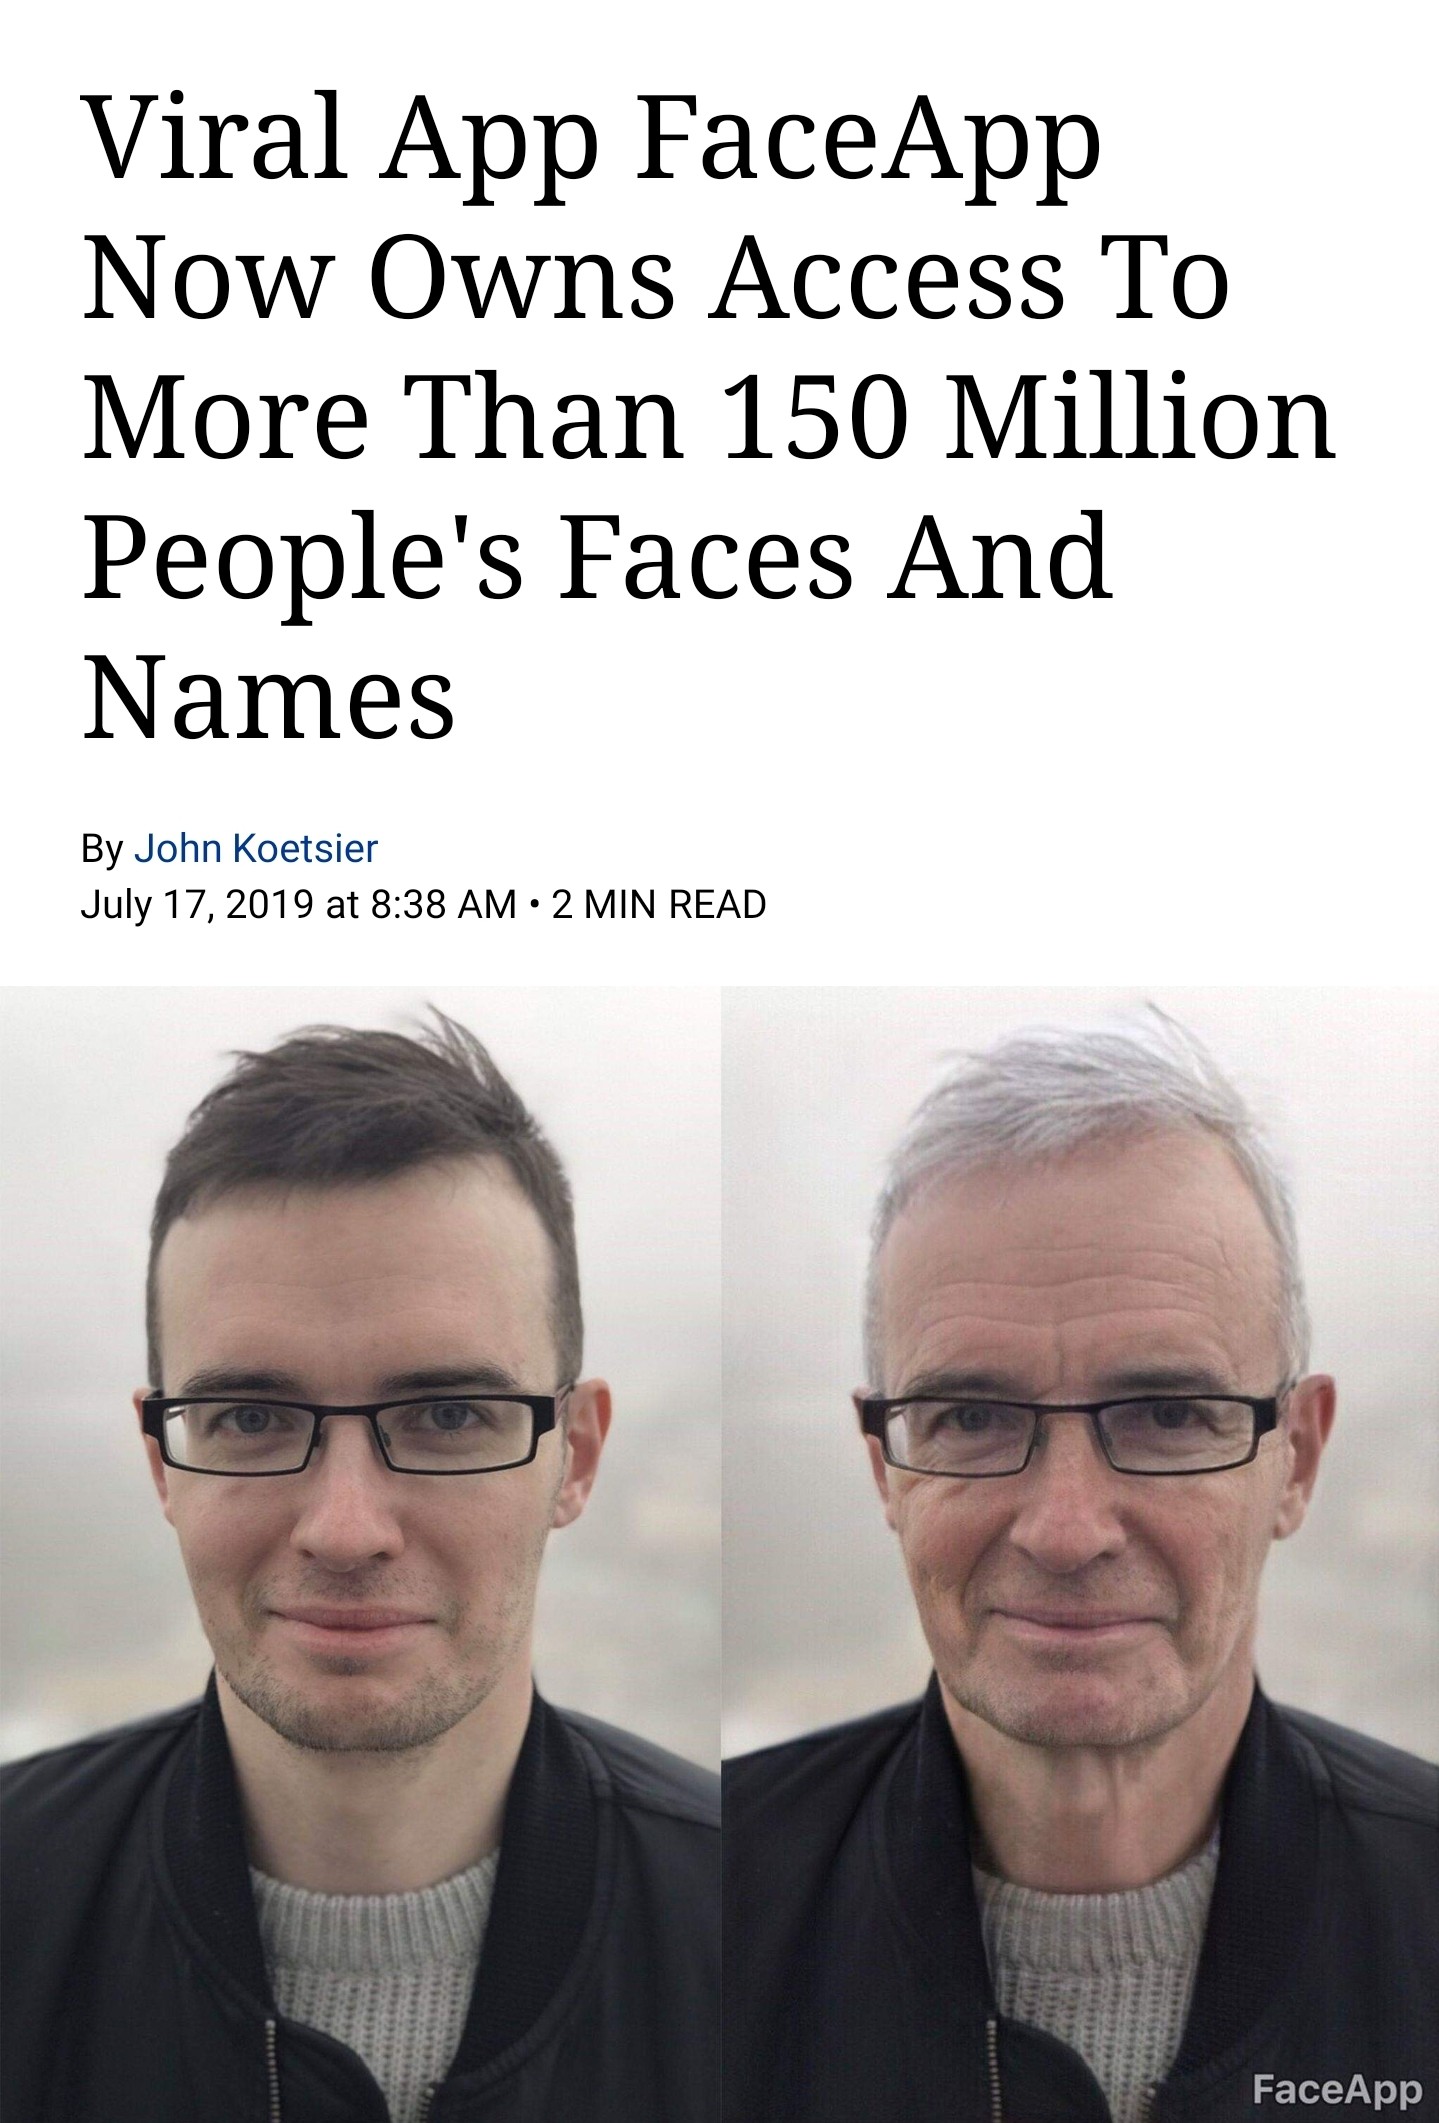 Viral App FaceApp Now Owns Access To More Than 150 Million People's Faces And Names By John Koetsier at 2 Min Read FaceApp